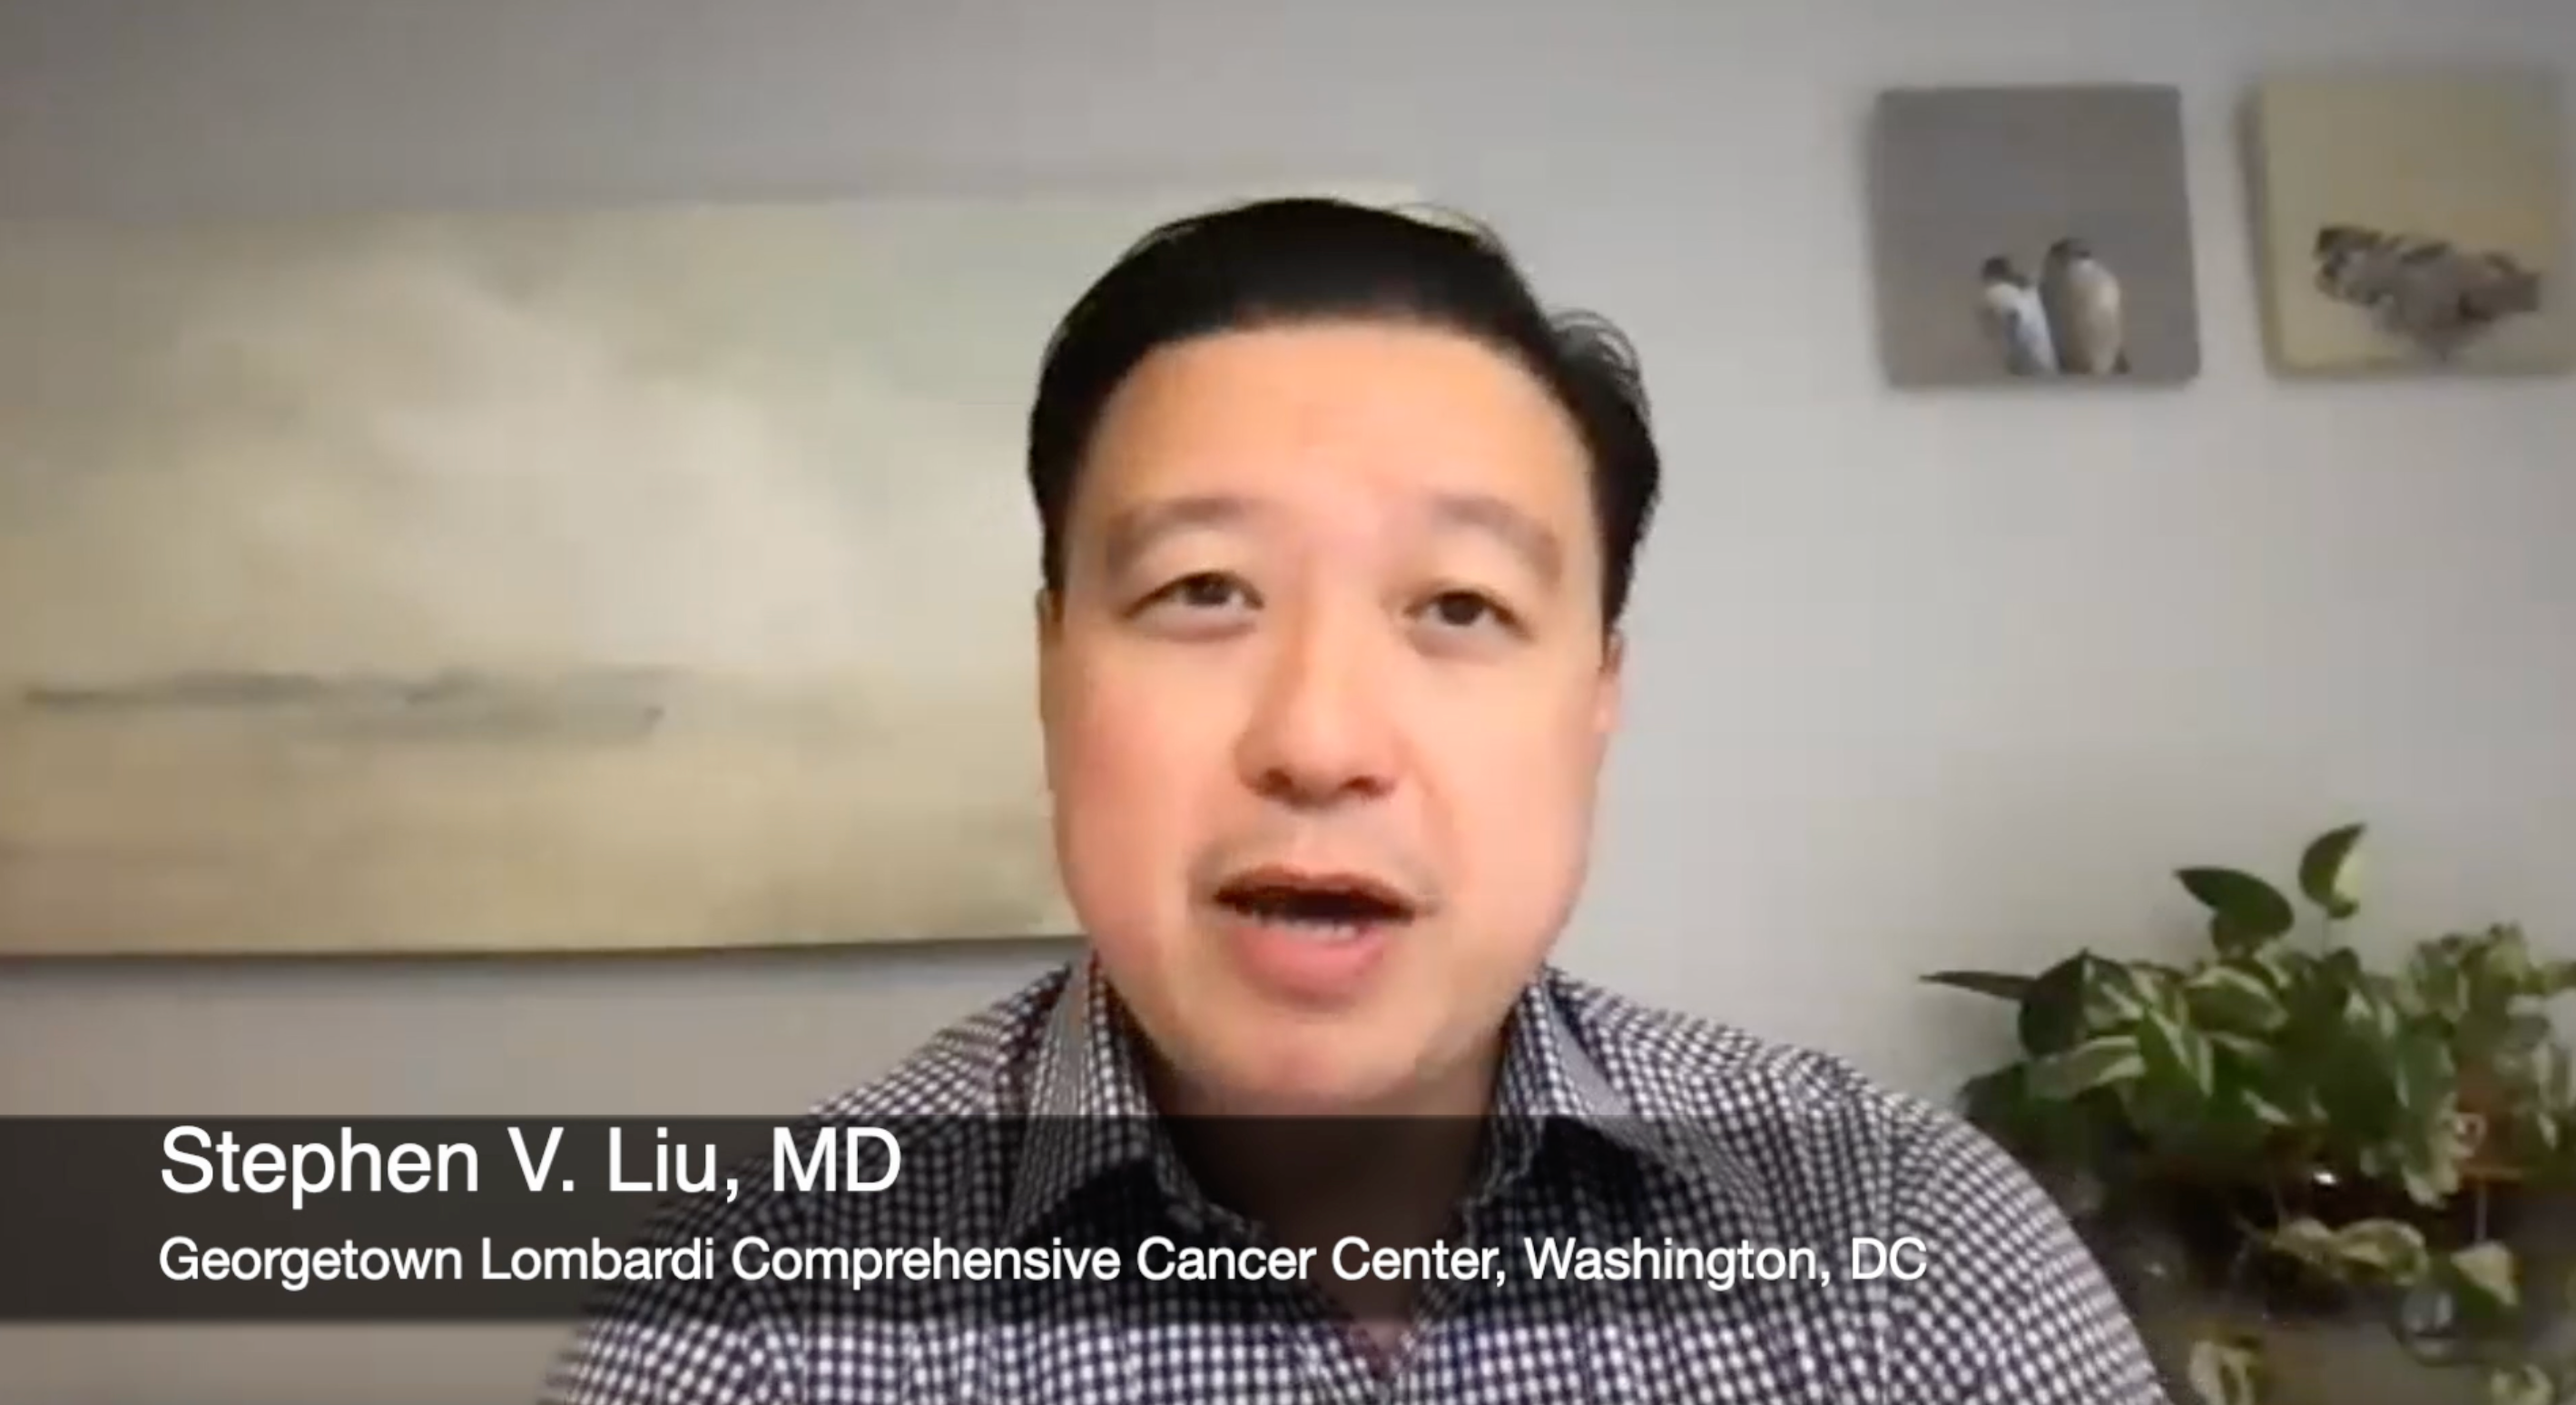 Stephen V. Liu, MD, Discussed the Importance of Testing for Oncogenic Drivers in Frontline NSCLC 